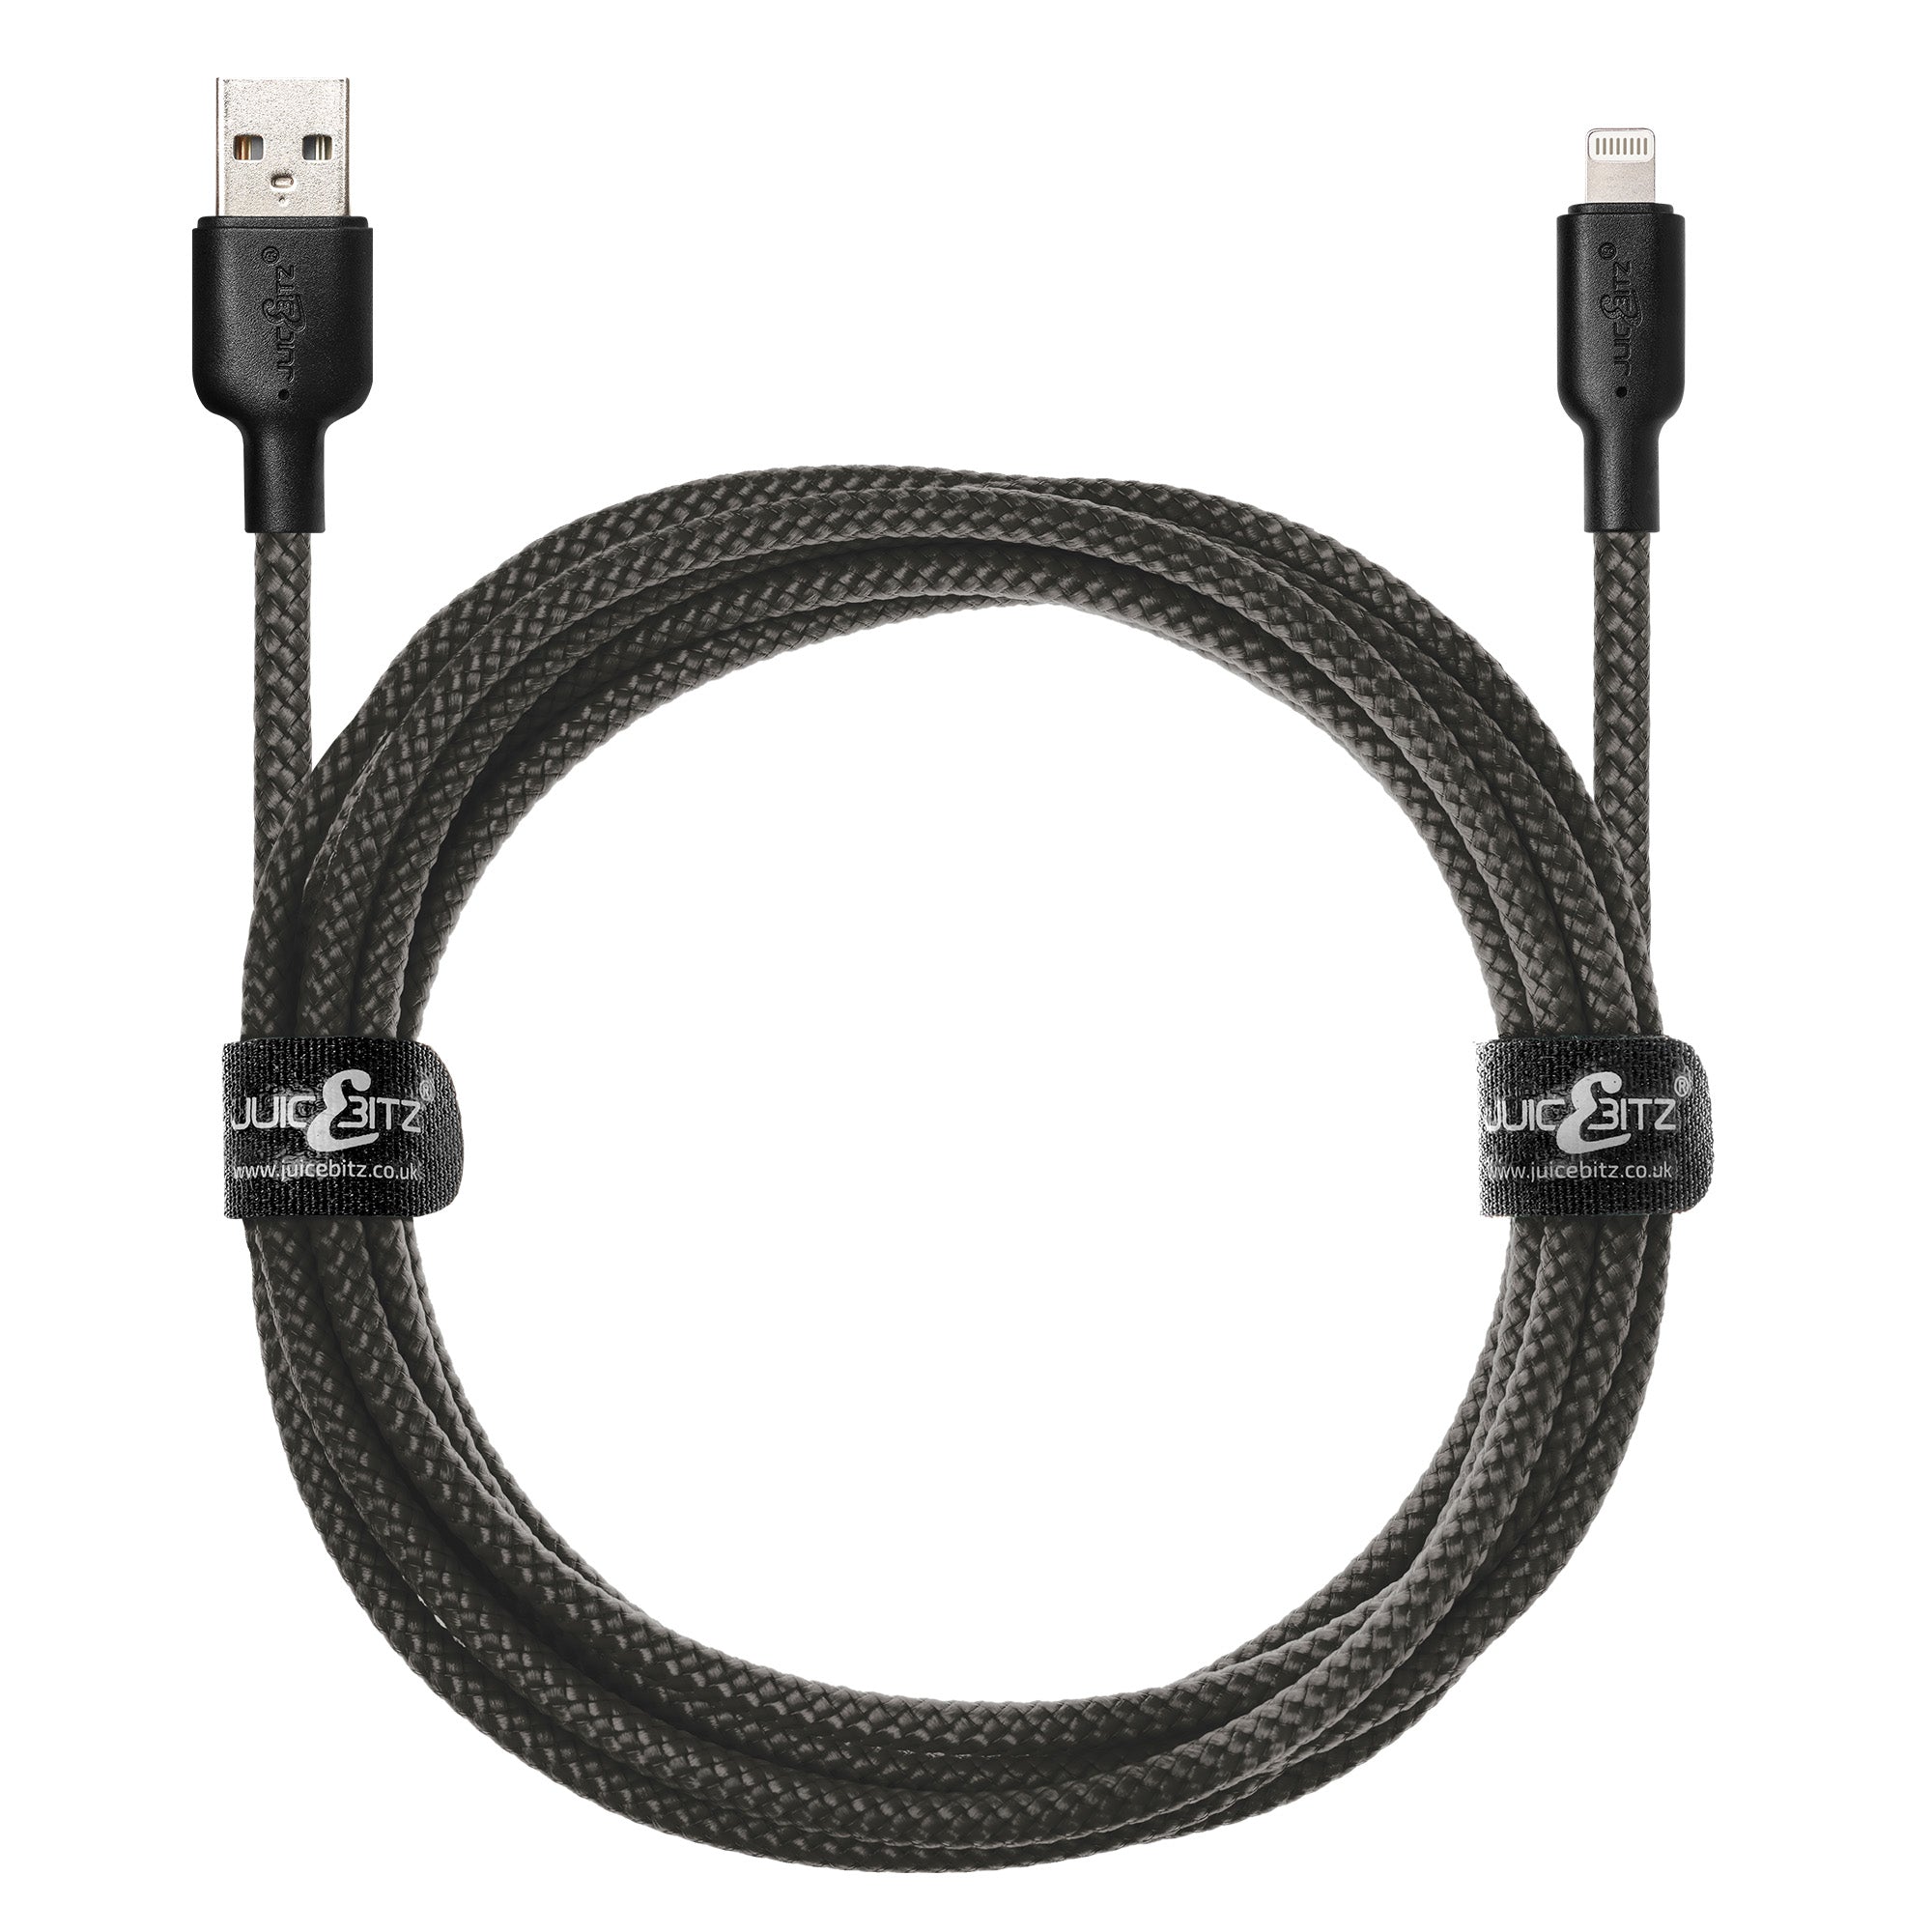 Braided Heavy Duty USB Charger Cable Data Sync Wire Lead for iPhone, iPad, iPod - Grey